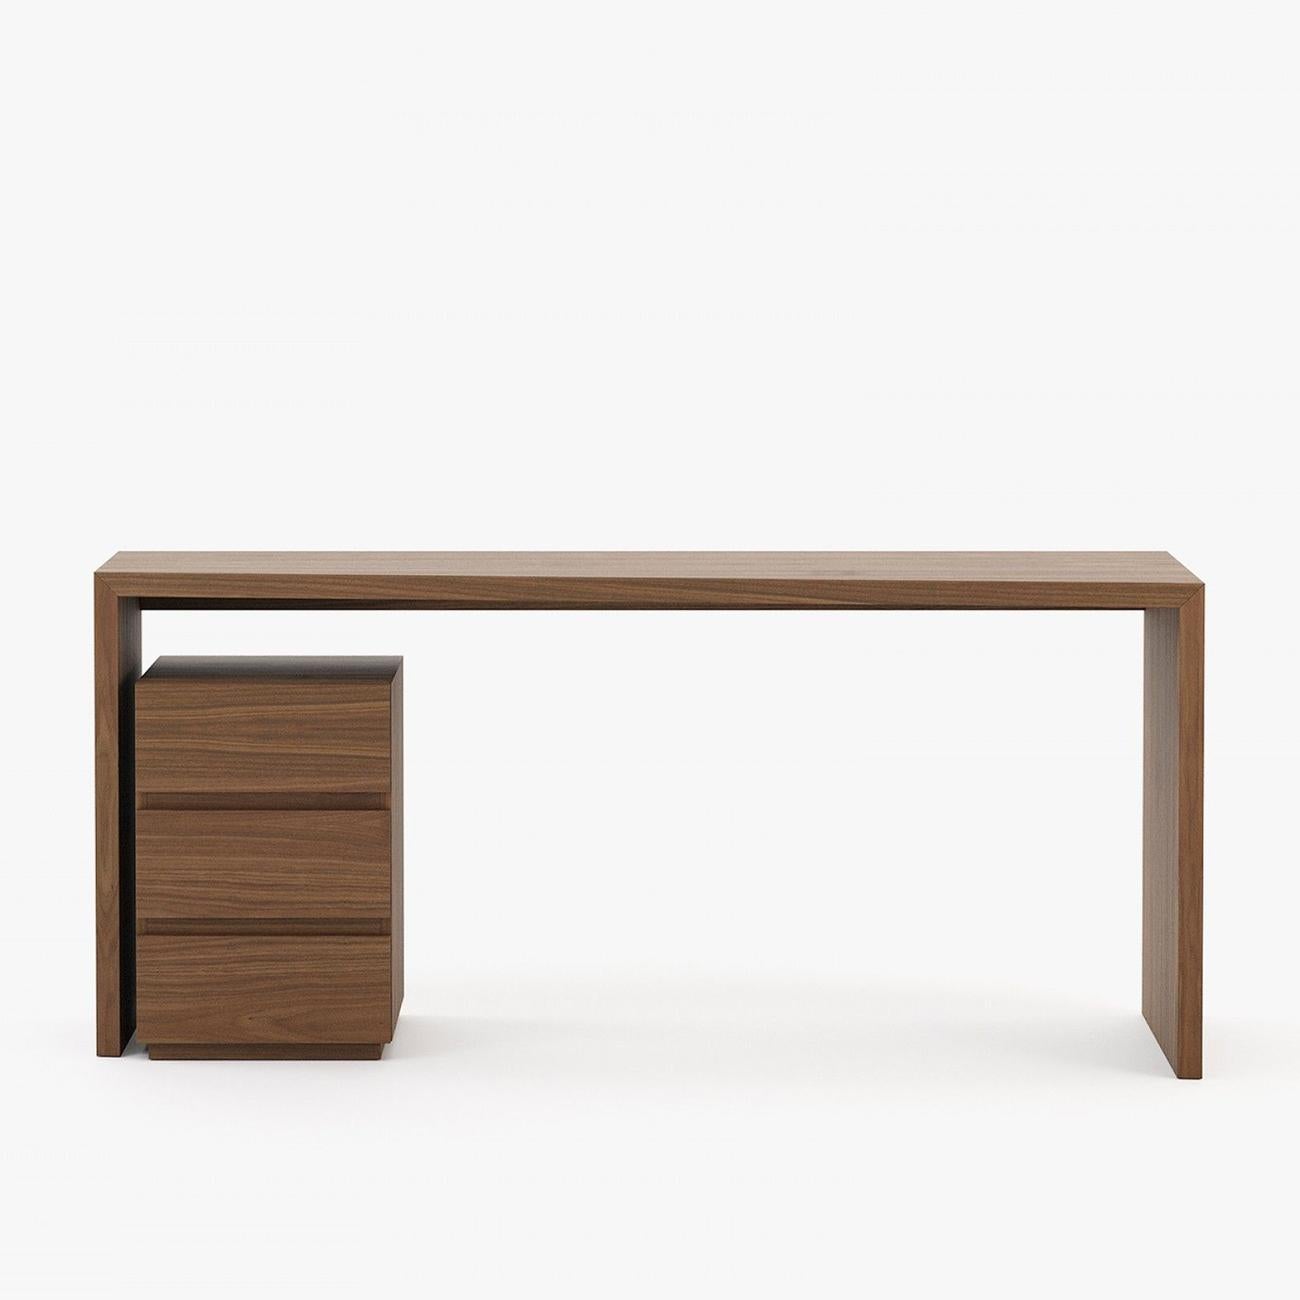 Desk sharper walnut with all structure in matte walnut wood veneer,
top depth is 40cm (15.75 inch) to 60cm (23.62 inch). With 3 drawers
with easy glide system.
Also available in natural oak veneer, or in grey oak matte veneer, or
in ebony matte